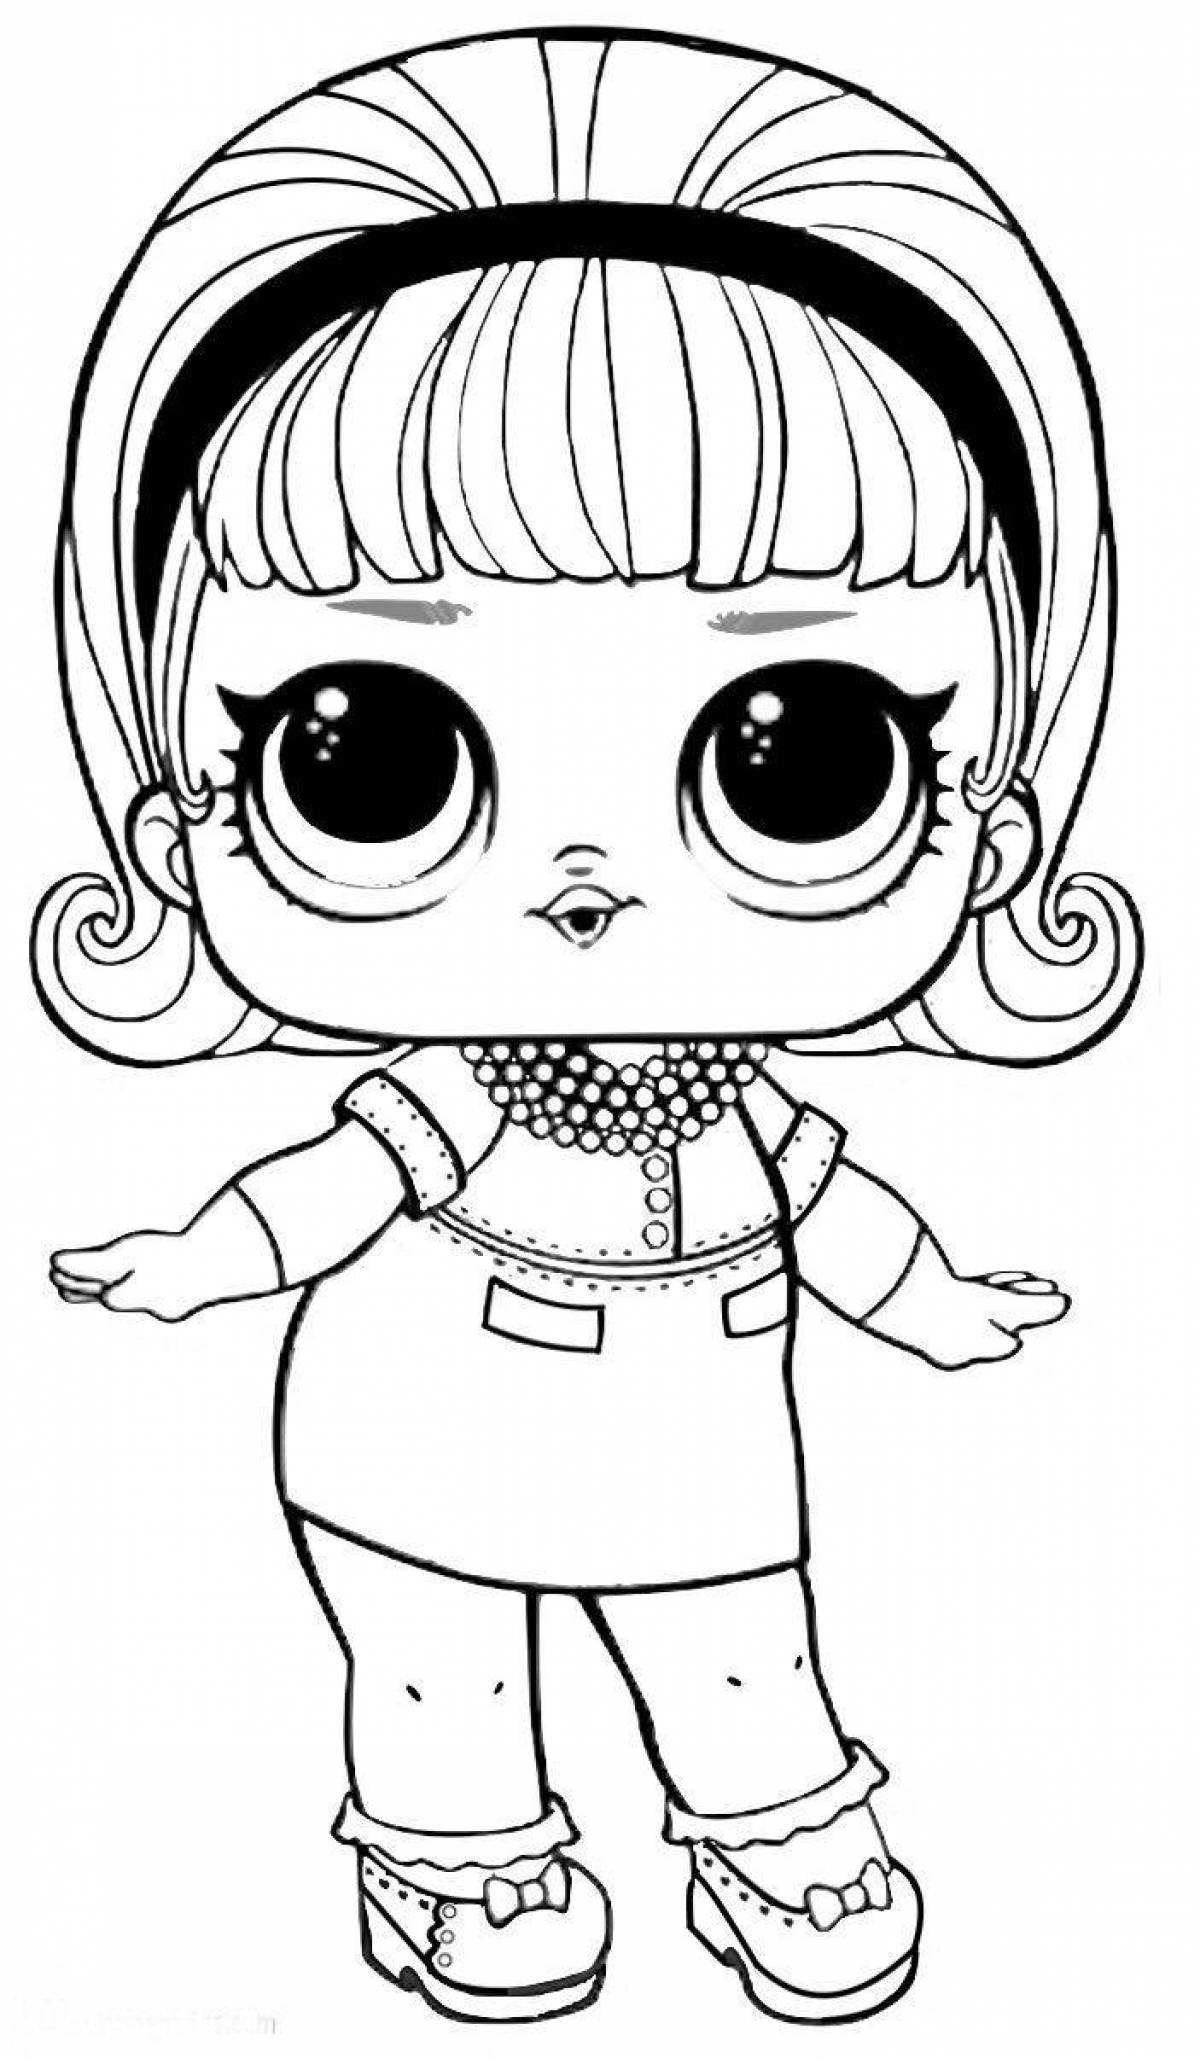 Coloring page charming doll